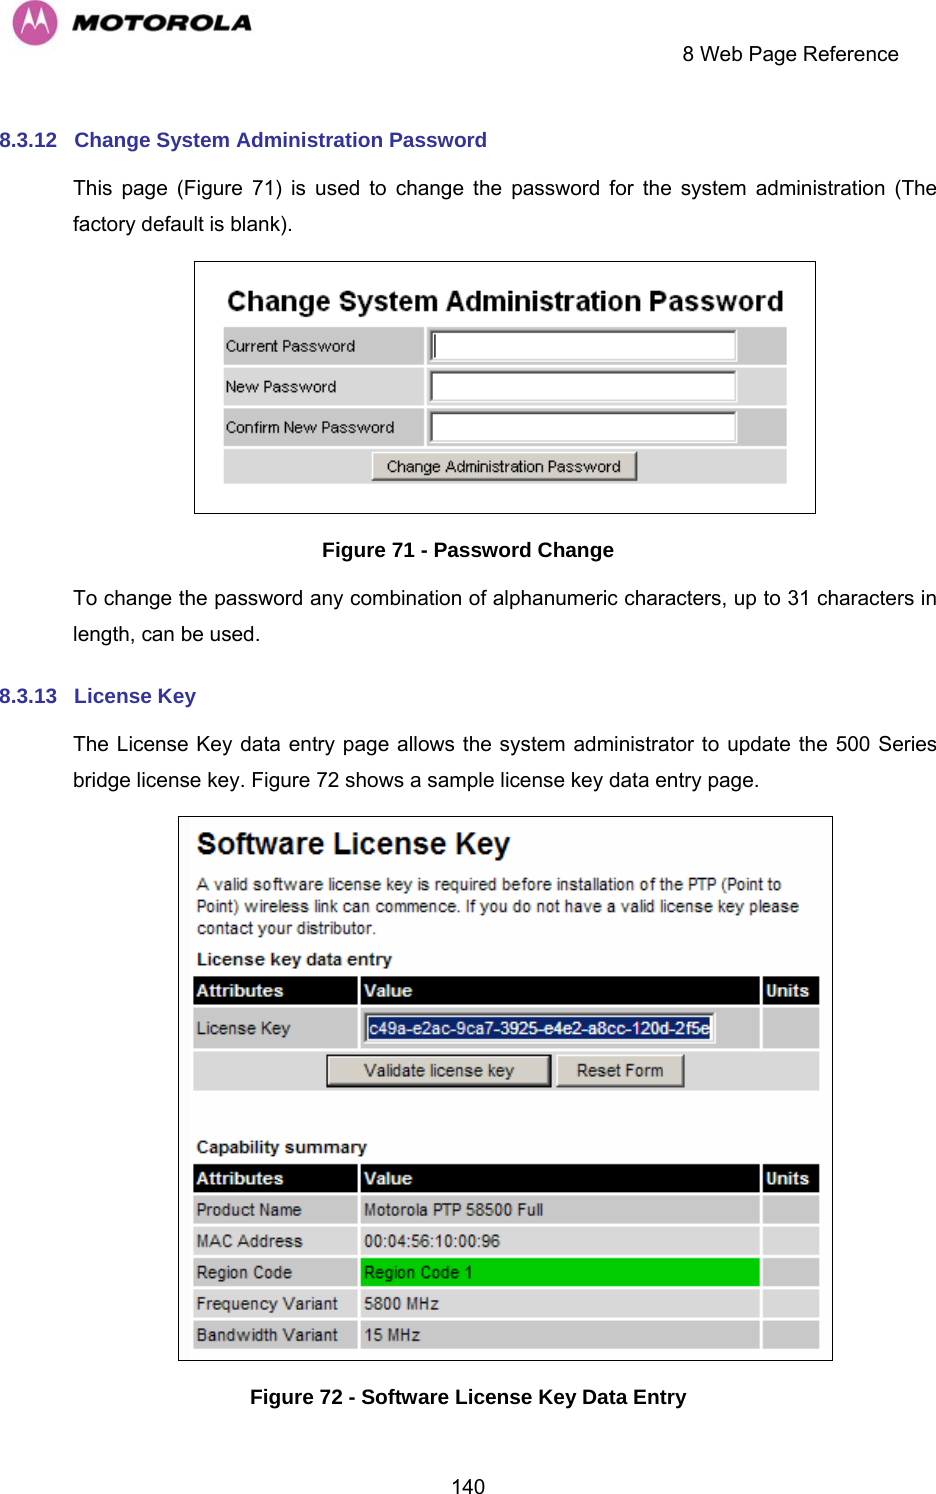     8 Web Page Reference  1408.3.12  Change System Administration Password  This page (Figure 71) is used to change the password for the system administration (The factory default is blank).  Figure 71 - Password Change To change the password any combination of alphanumeric characters, up to 31 characters in length, can be used. 8.3.13  License Key The License Key data entry page allows the system administrator to update the 500 Series bridge license key. Figure 72 shows a sample license key data entry page.  Figure 72 - Software License Key Data Entry 